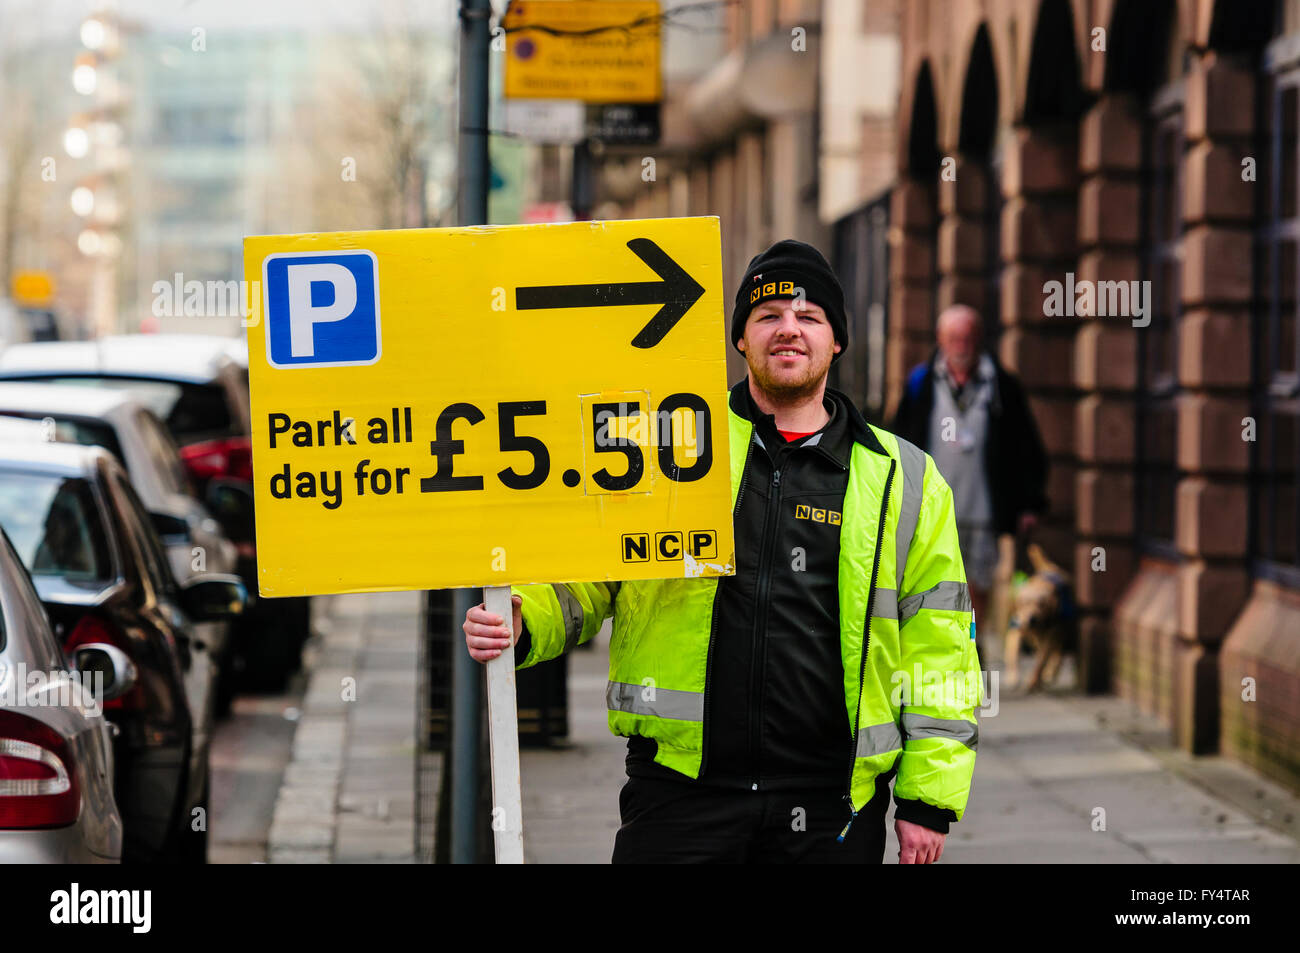 An NCP employee holds a sign directing motorists to all-day parking for £5.50 Stock Photo